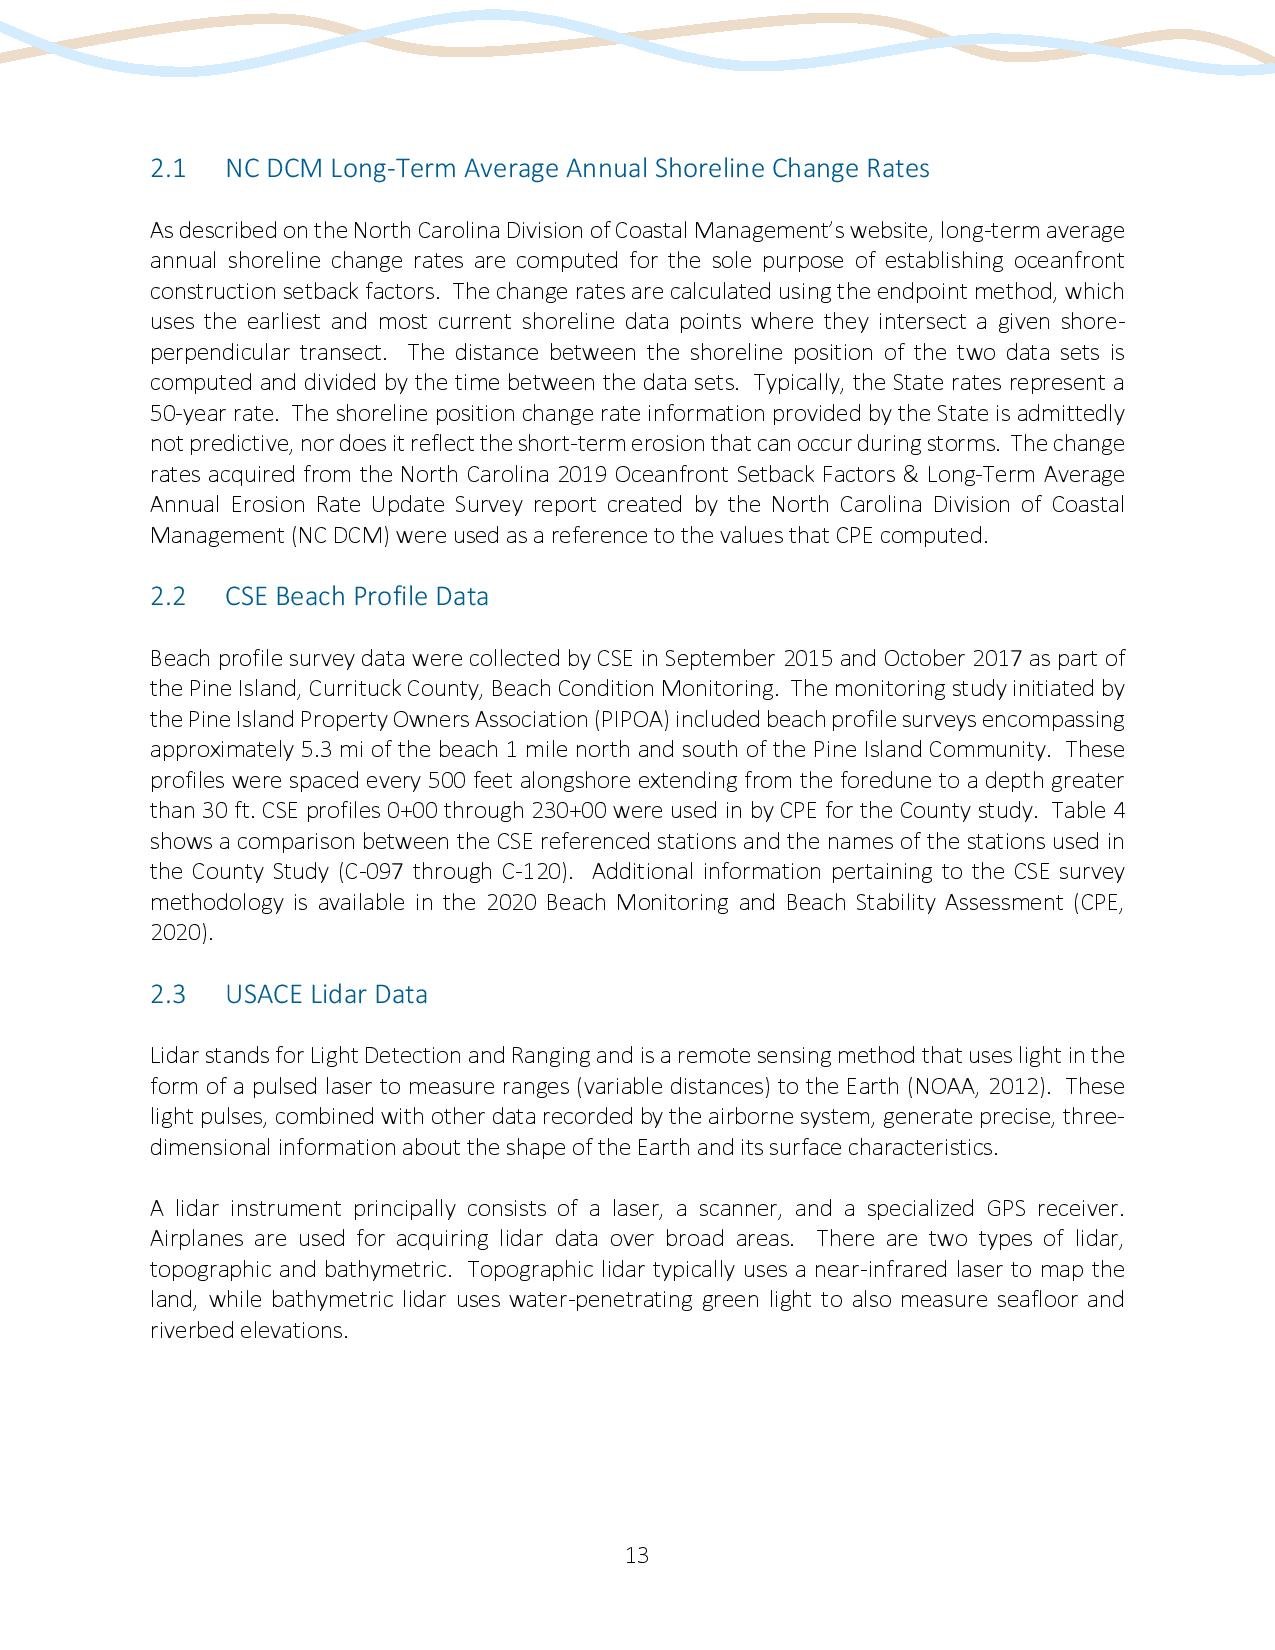 2021 Beach Monitoring and Beach Stability Assessment-page-022.jpg